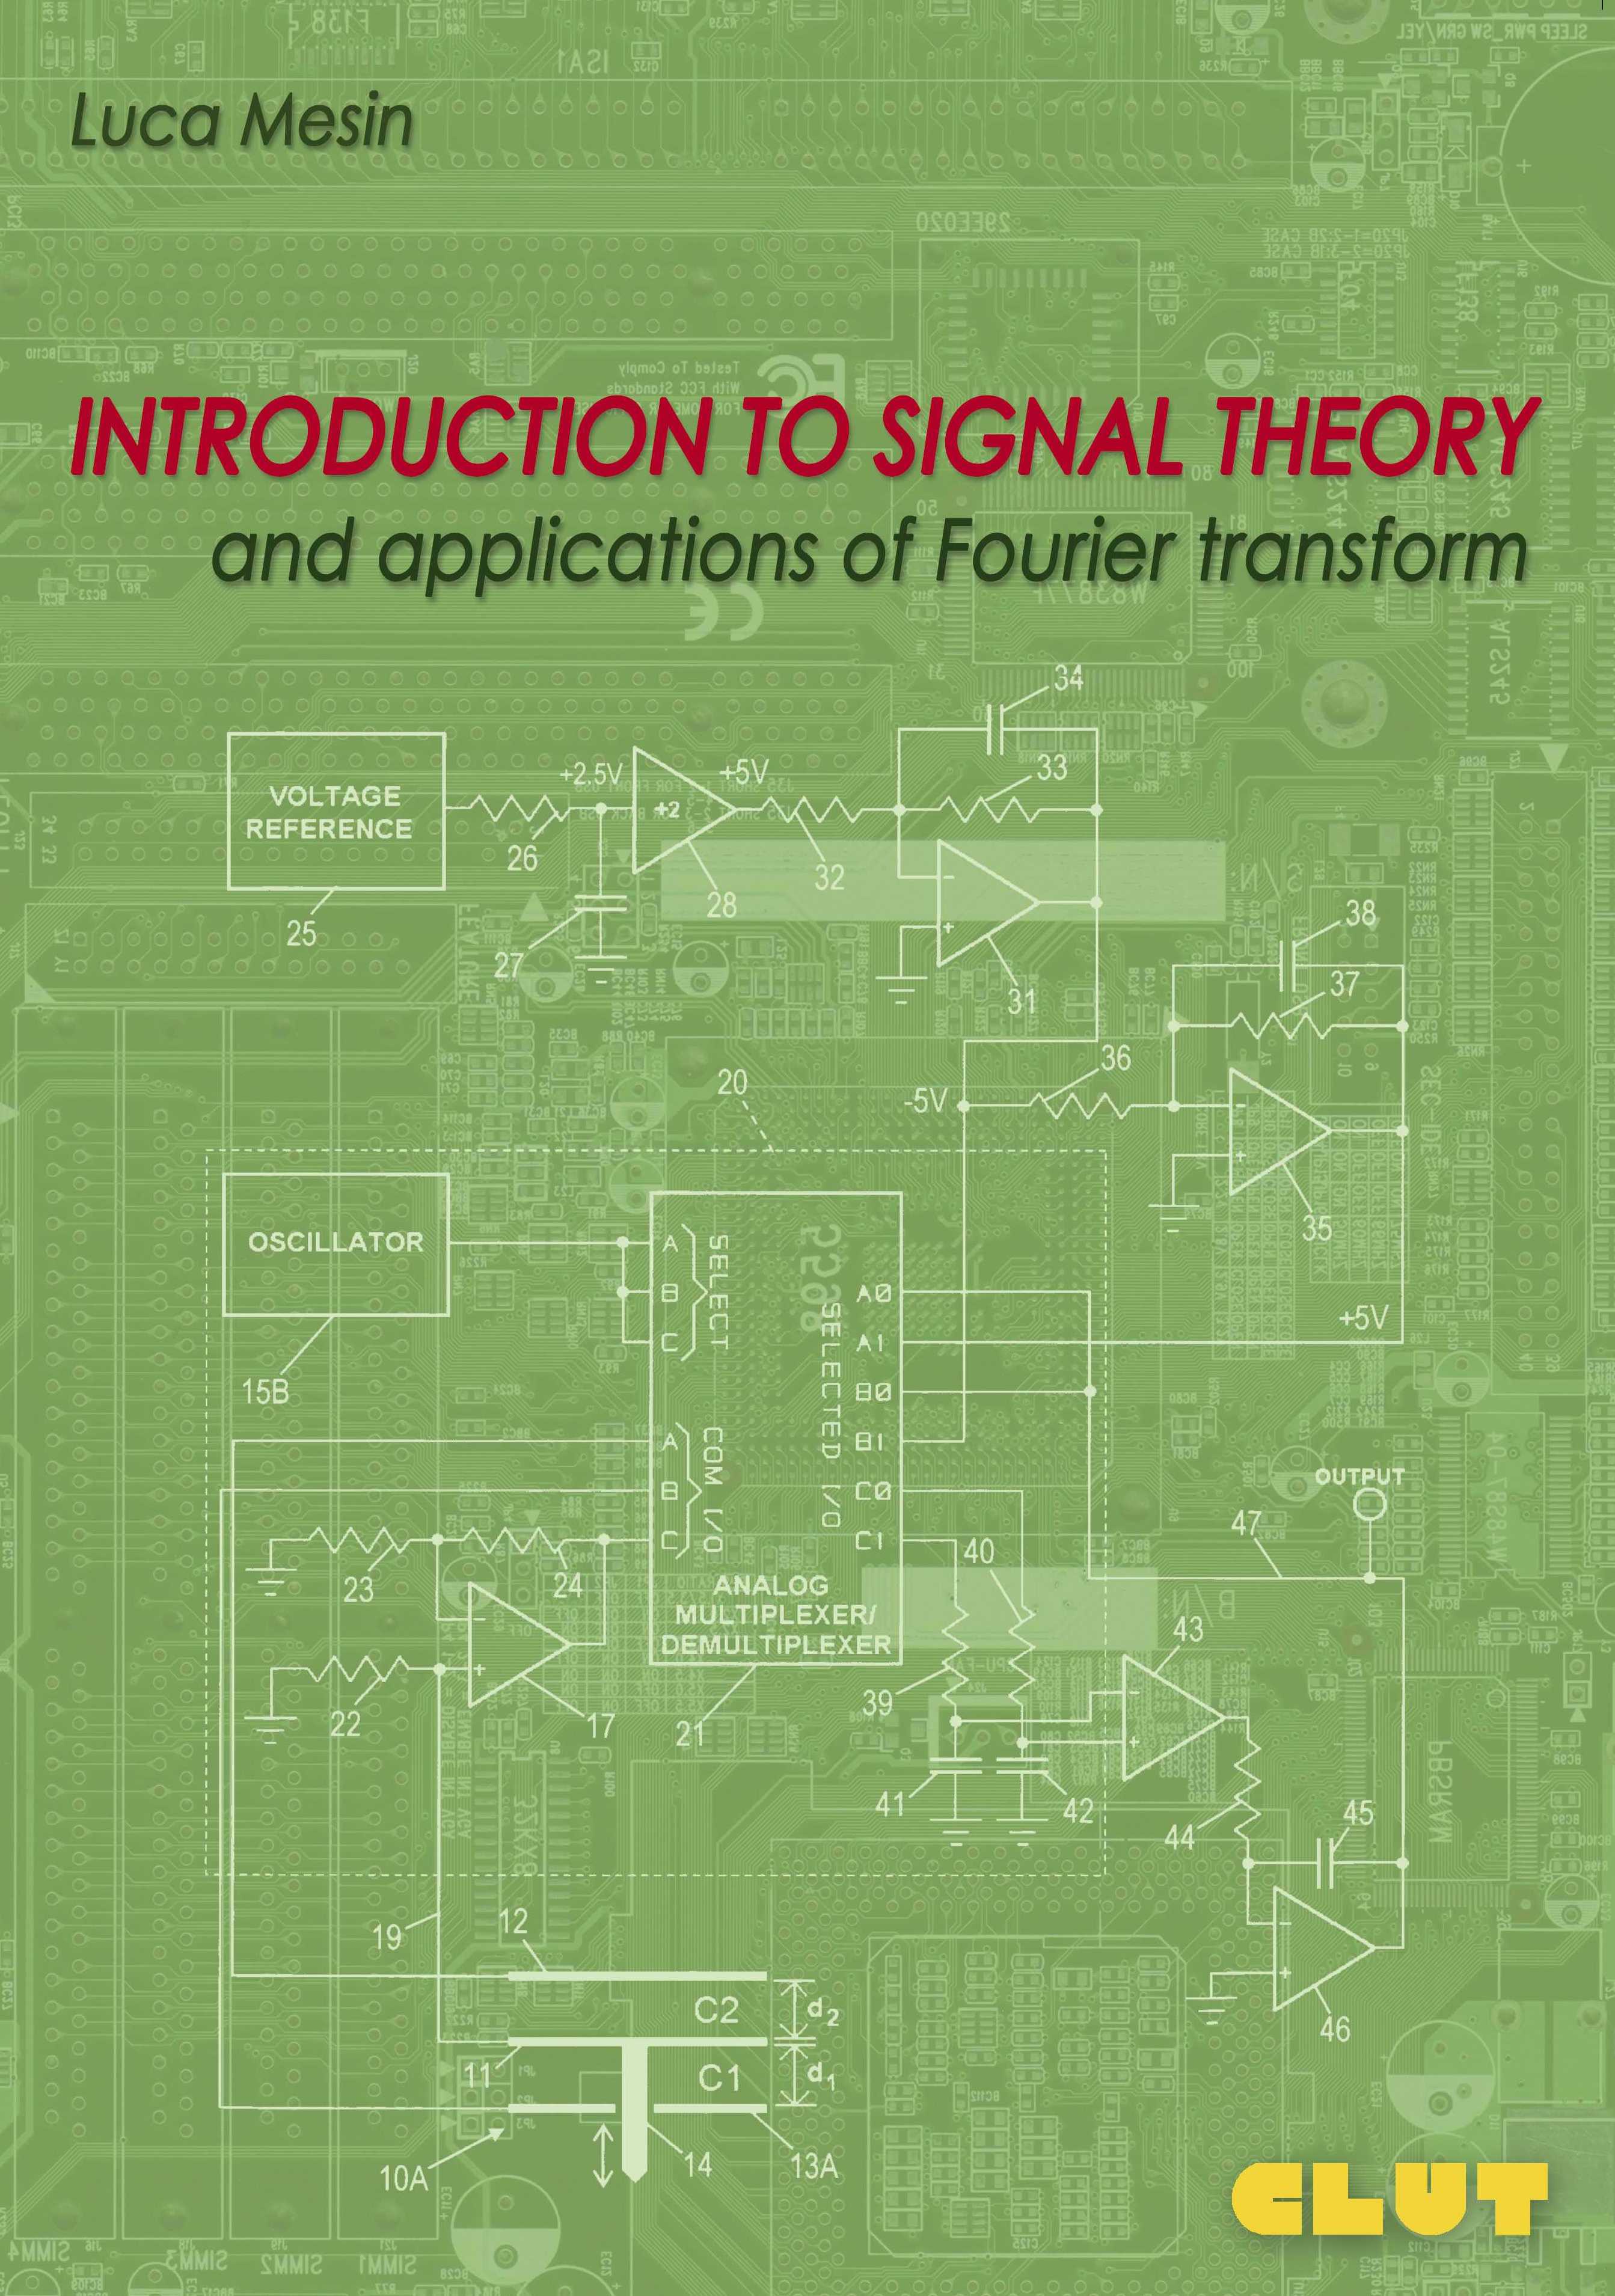 INTRODUCTION TO SIGNAL THEORY AND APPLICATIONS OF FOURIER TRANFORM